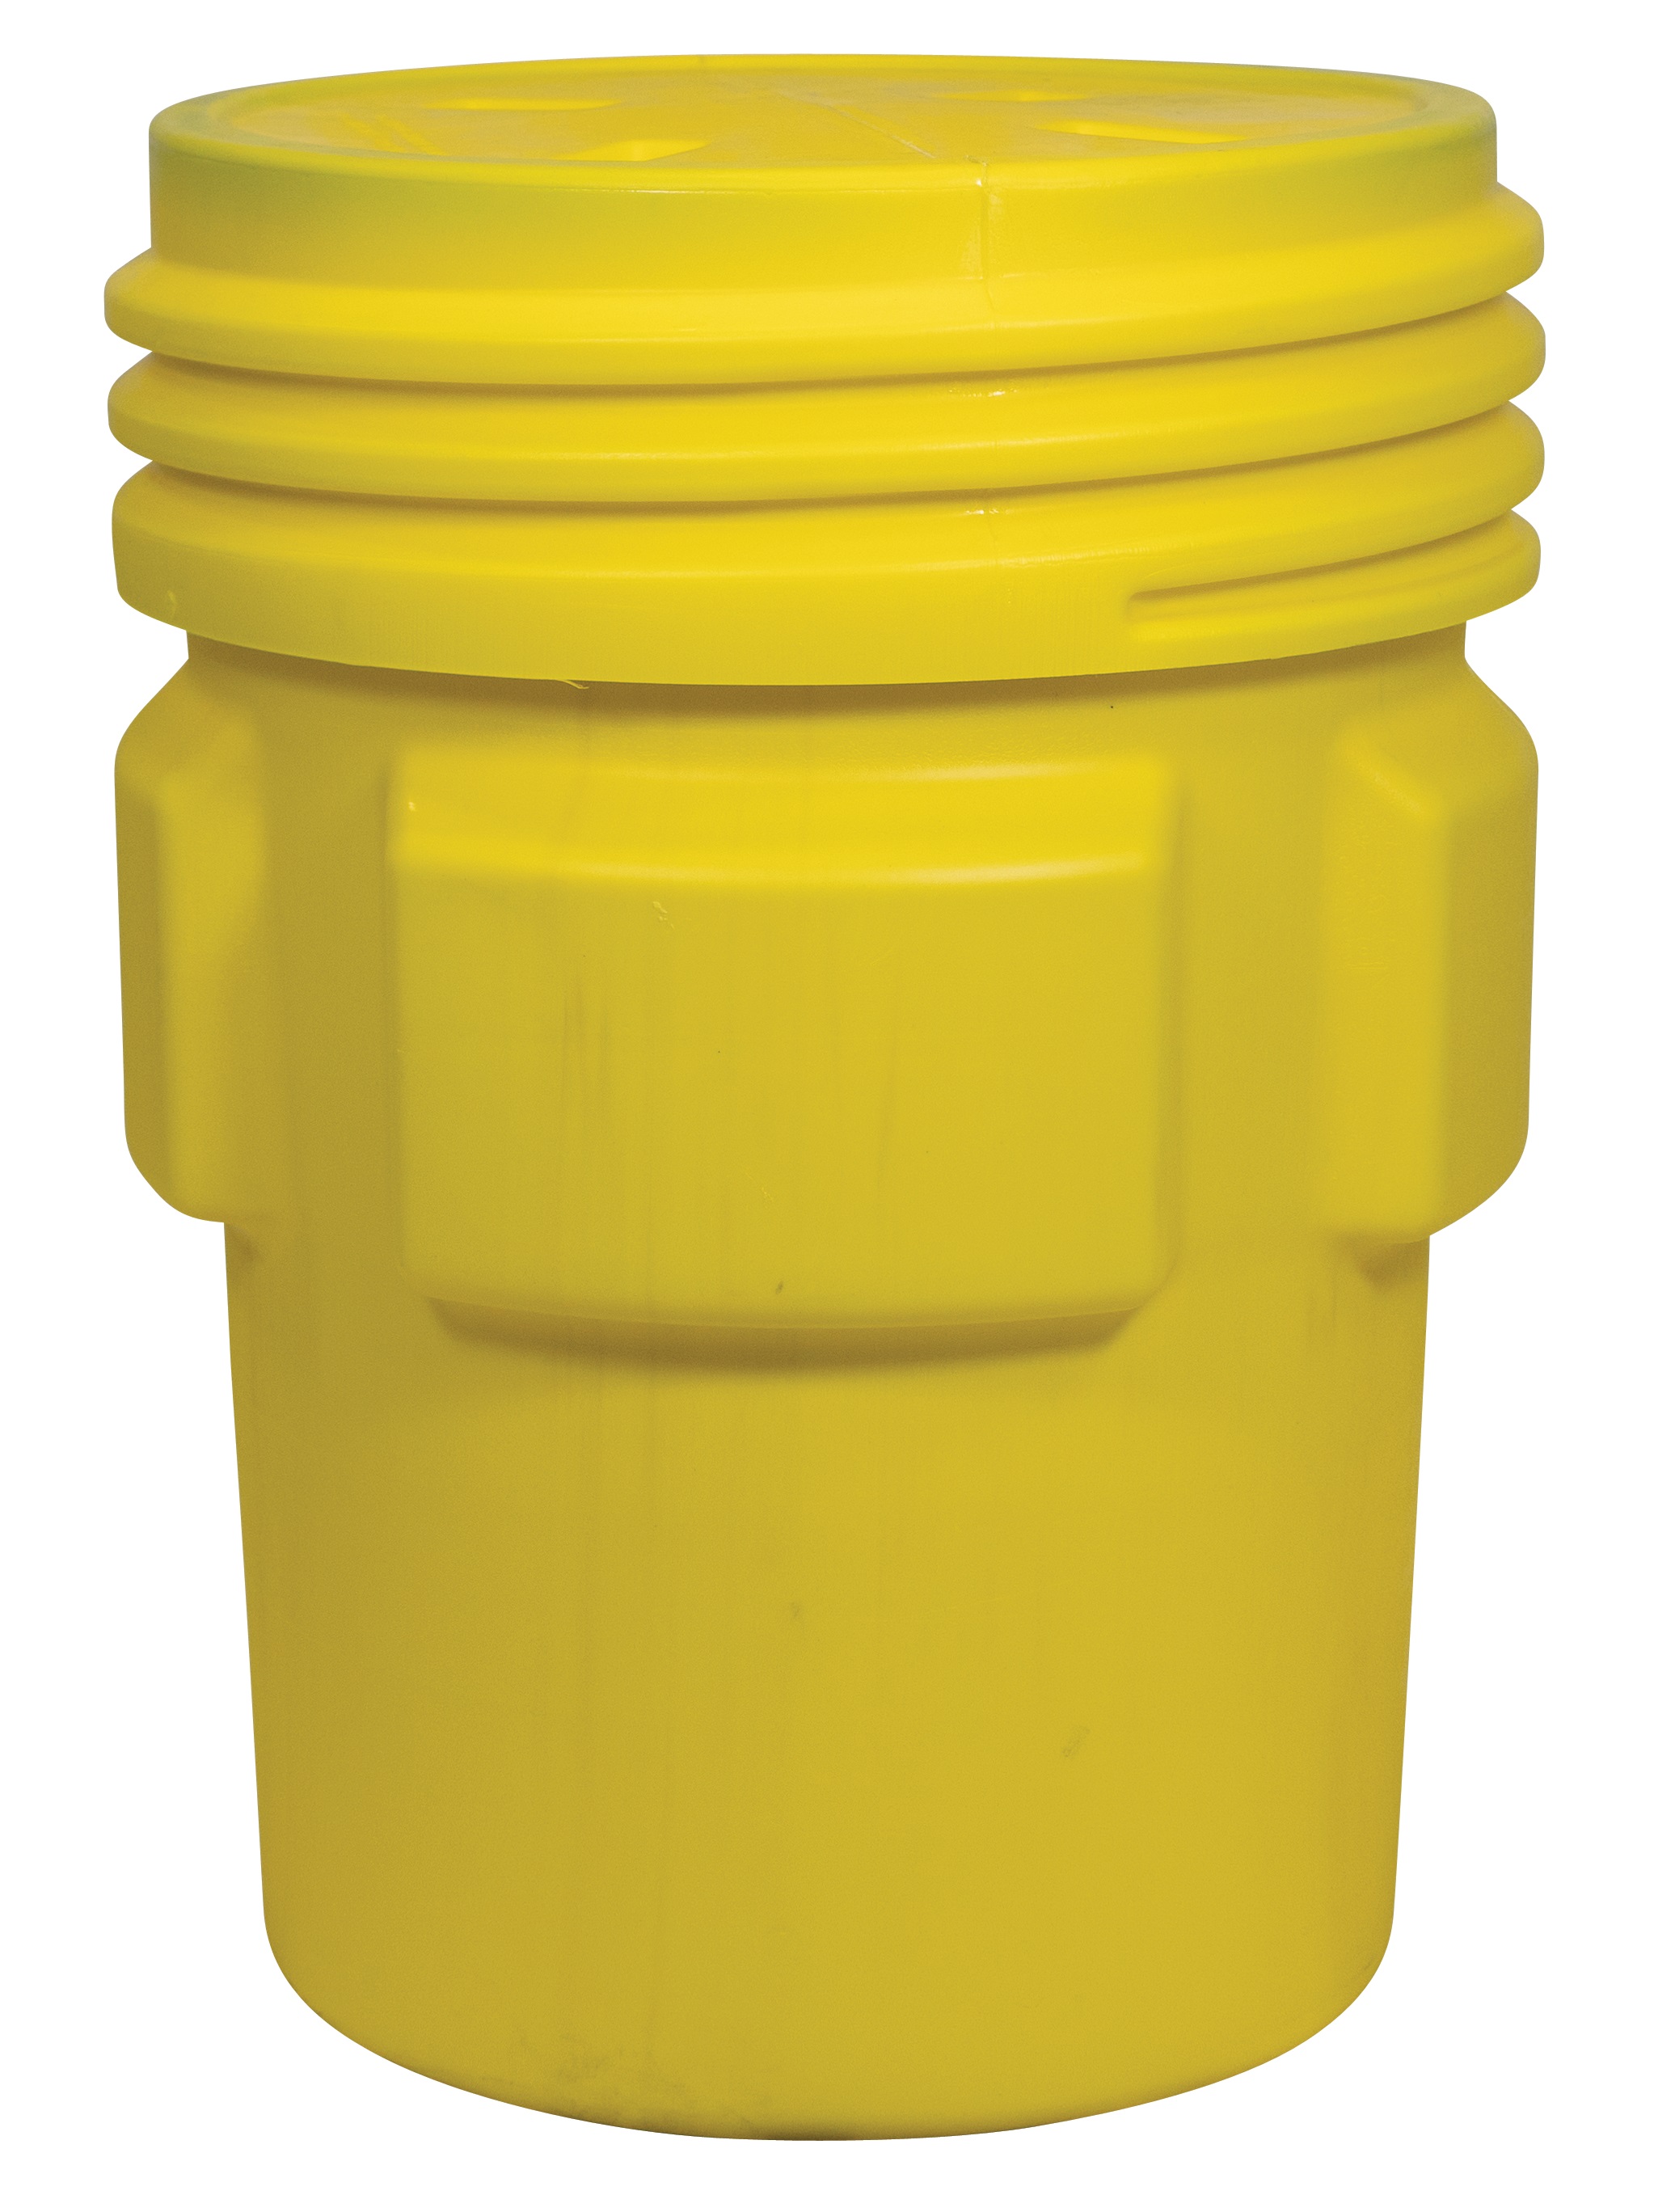 Eagle 1690 95 GAL OVERPACK-YELLOW